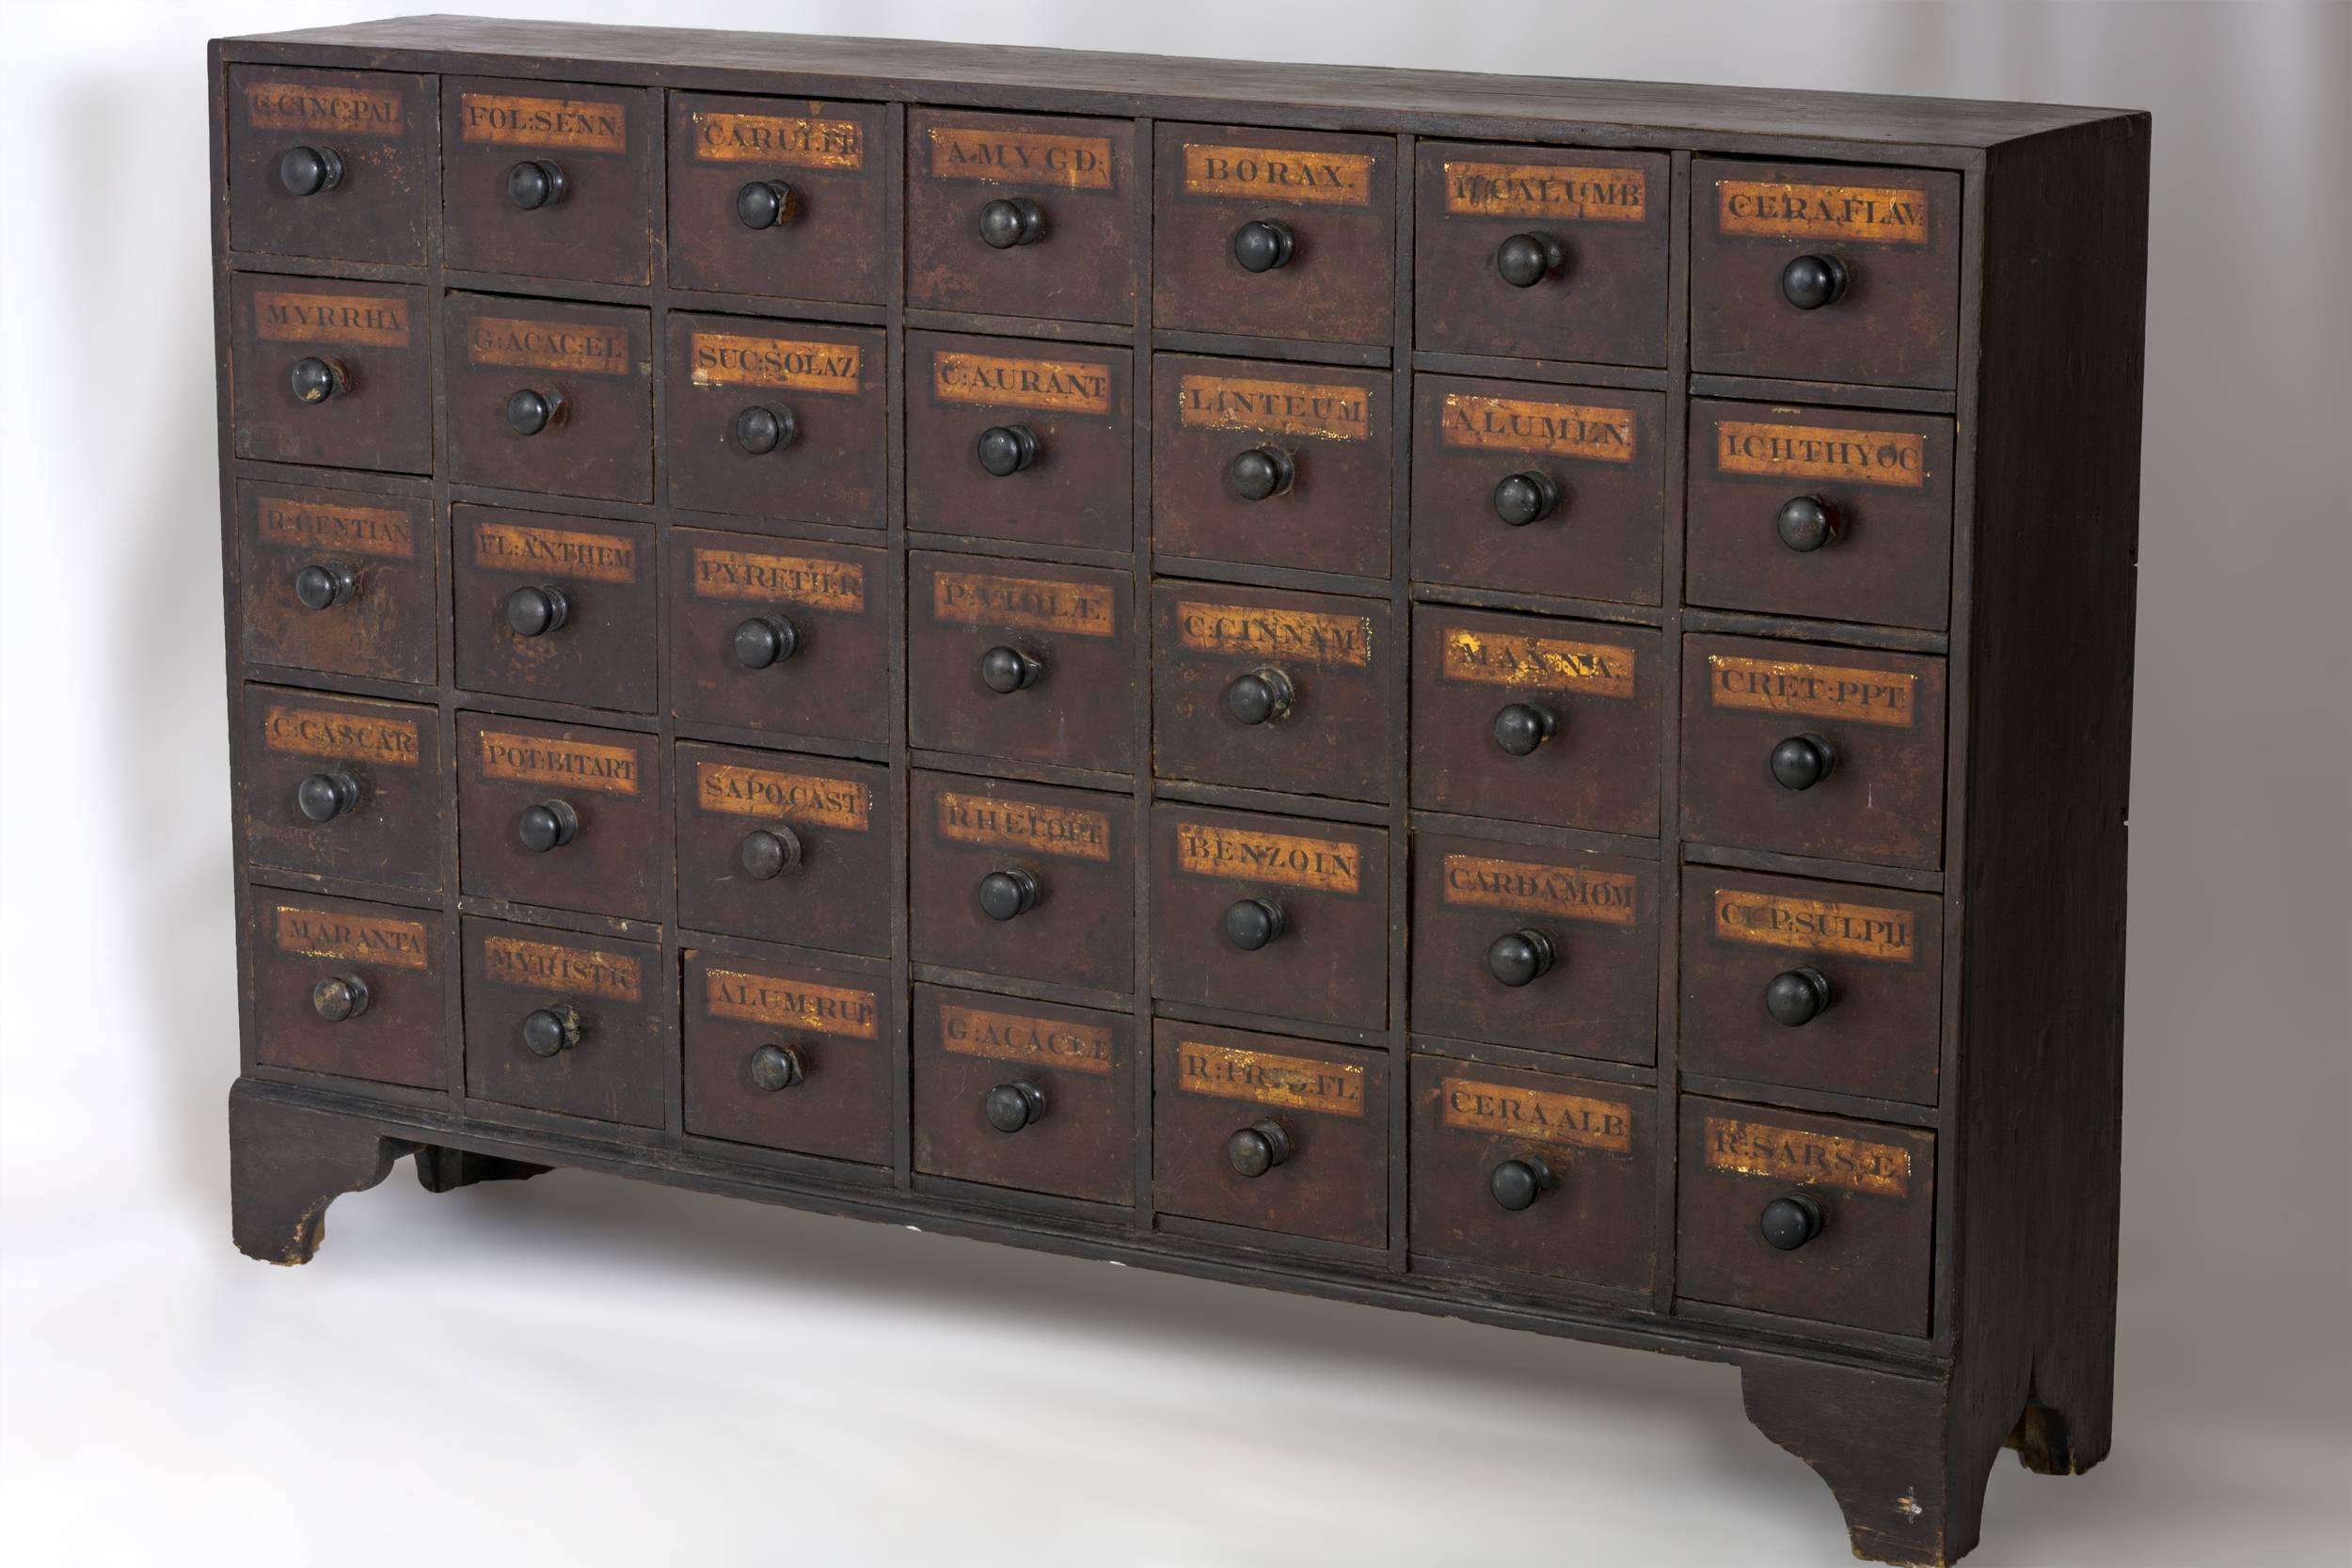 Mahogany apothecary chest with 35 drawers and 
painted labels on each drawer front indicating the 
contents. Turned wooden knobs with the case 
raised on bracket feet. Great original condition.
English, circa 1875. Measures: 32 ¼” x 50 ¾” x